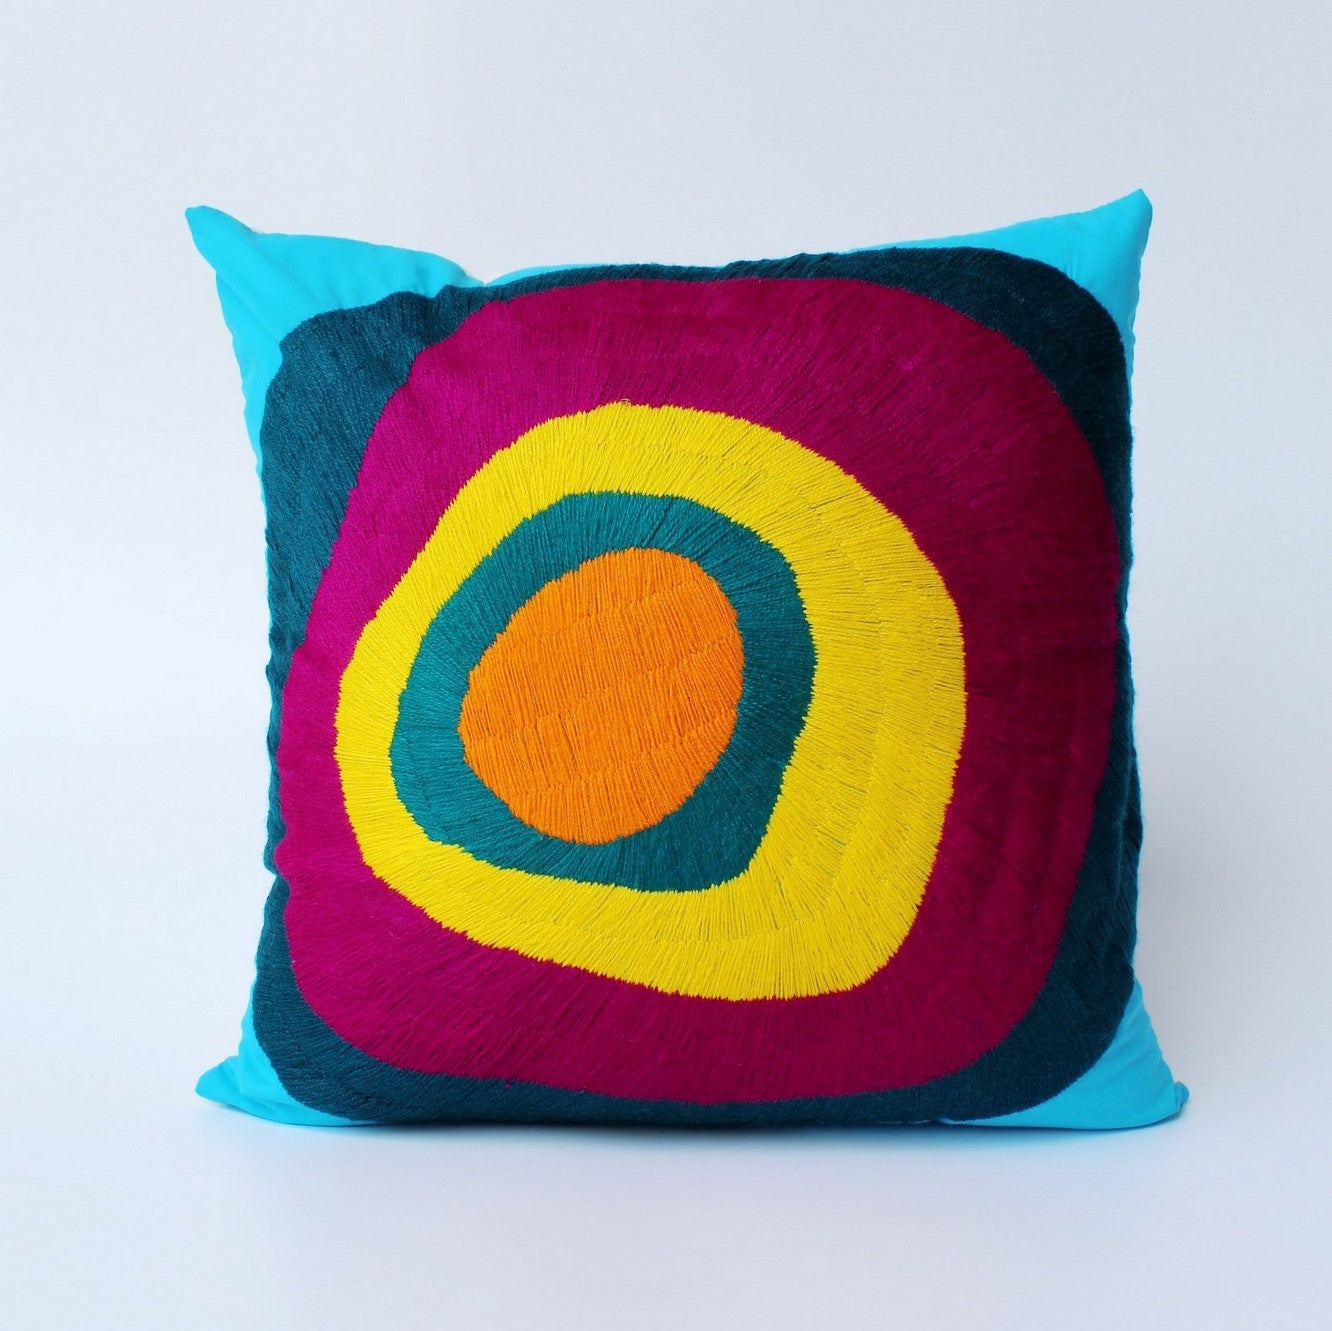 Embroidered pillow cover 16"x16" - Circles RED